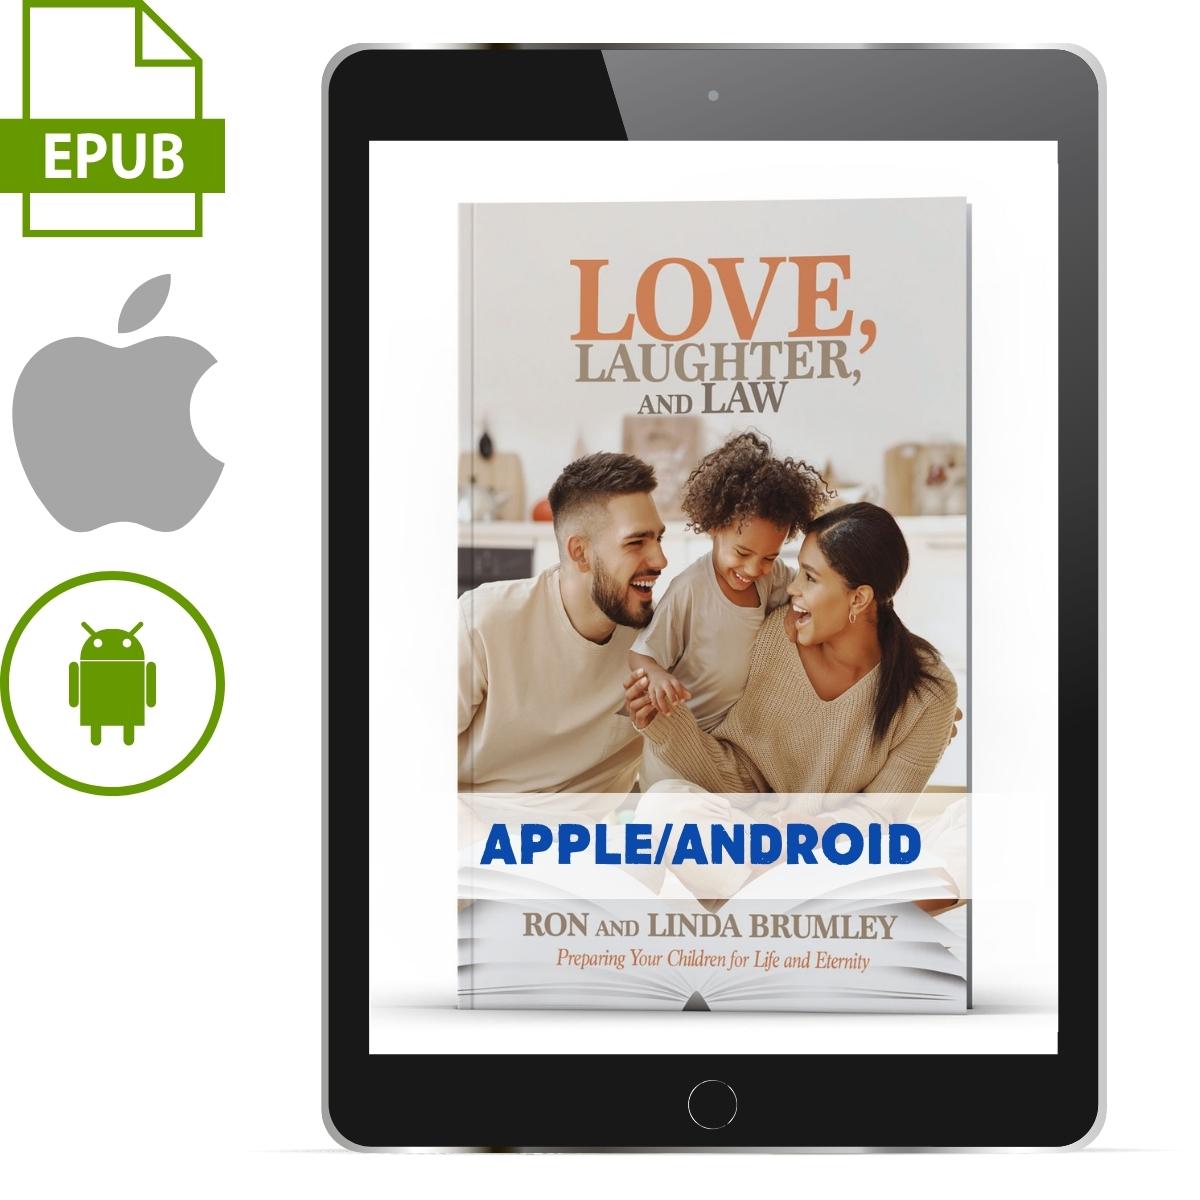 Love, Laughter, and Law ePub (Apple/Android) - Illumination Publishers